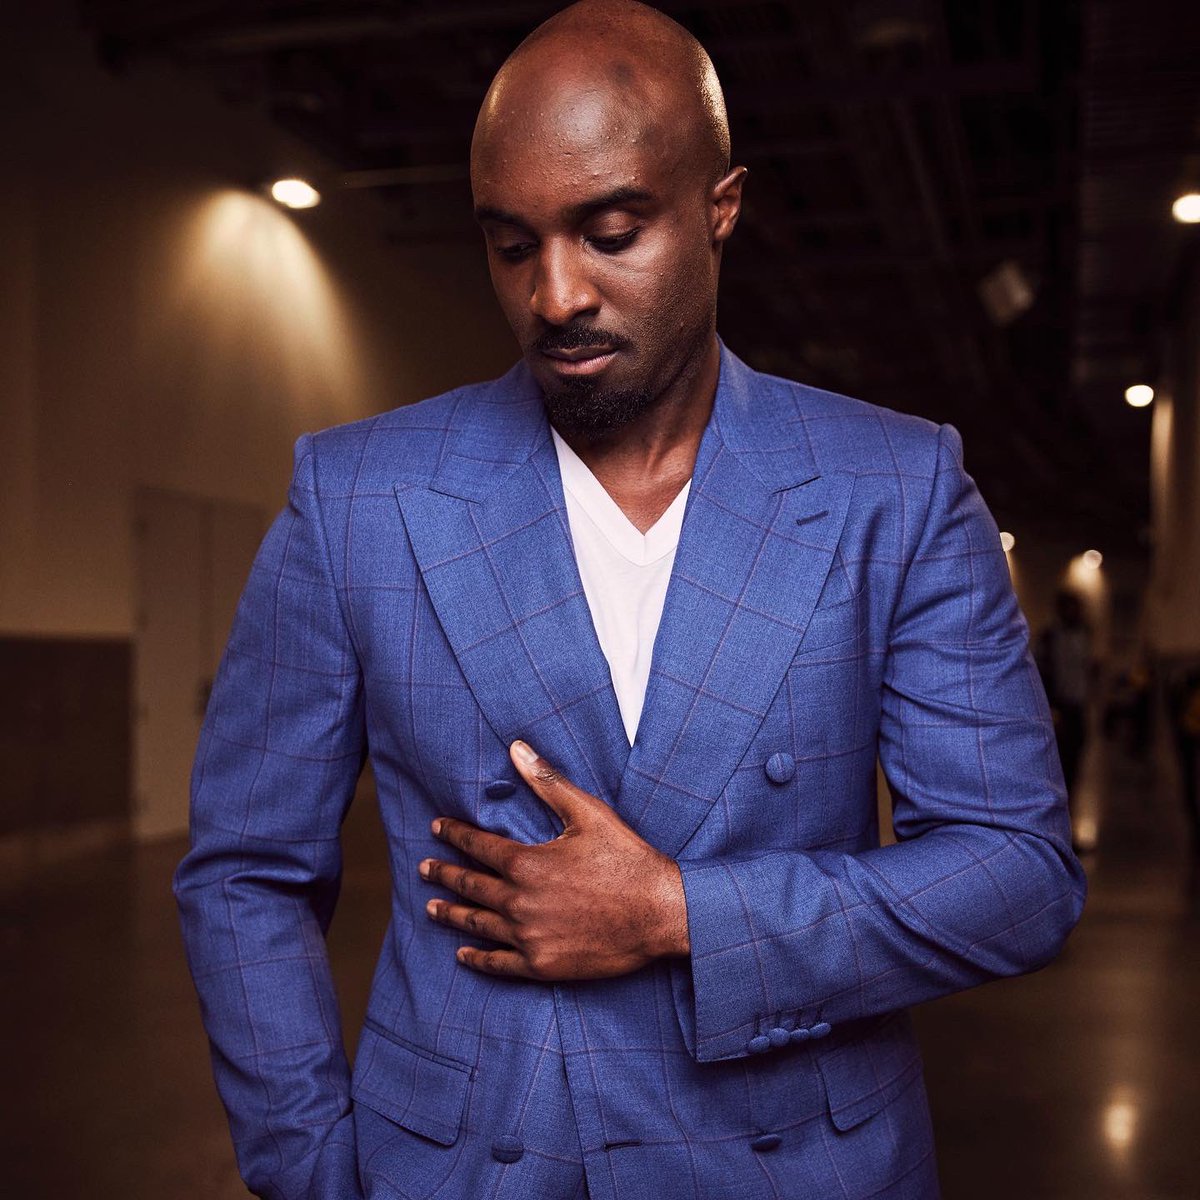 Empire' Star Toby Onwumere Explains Why Playing An HIV-Positive